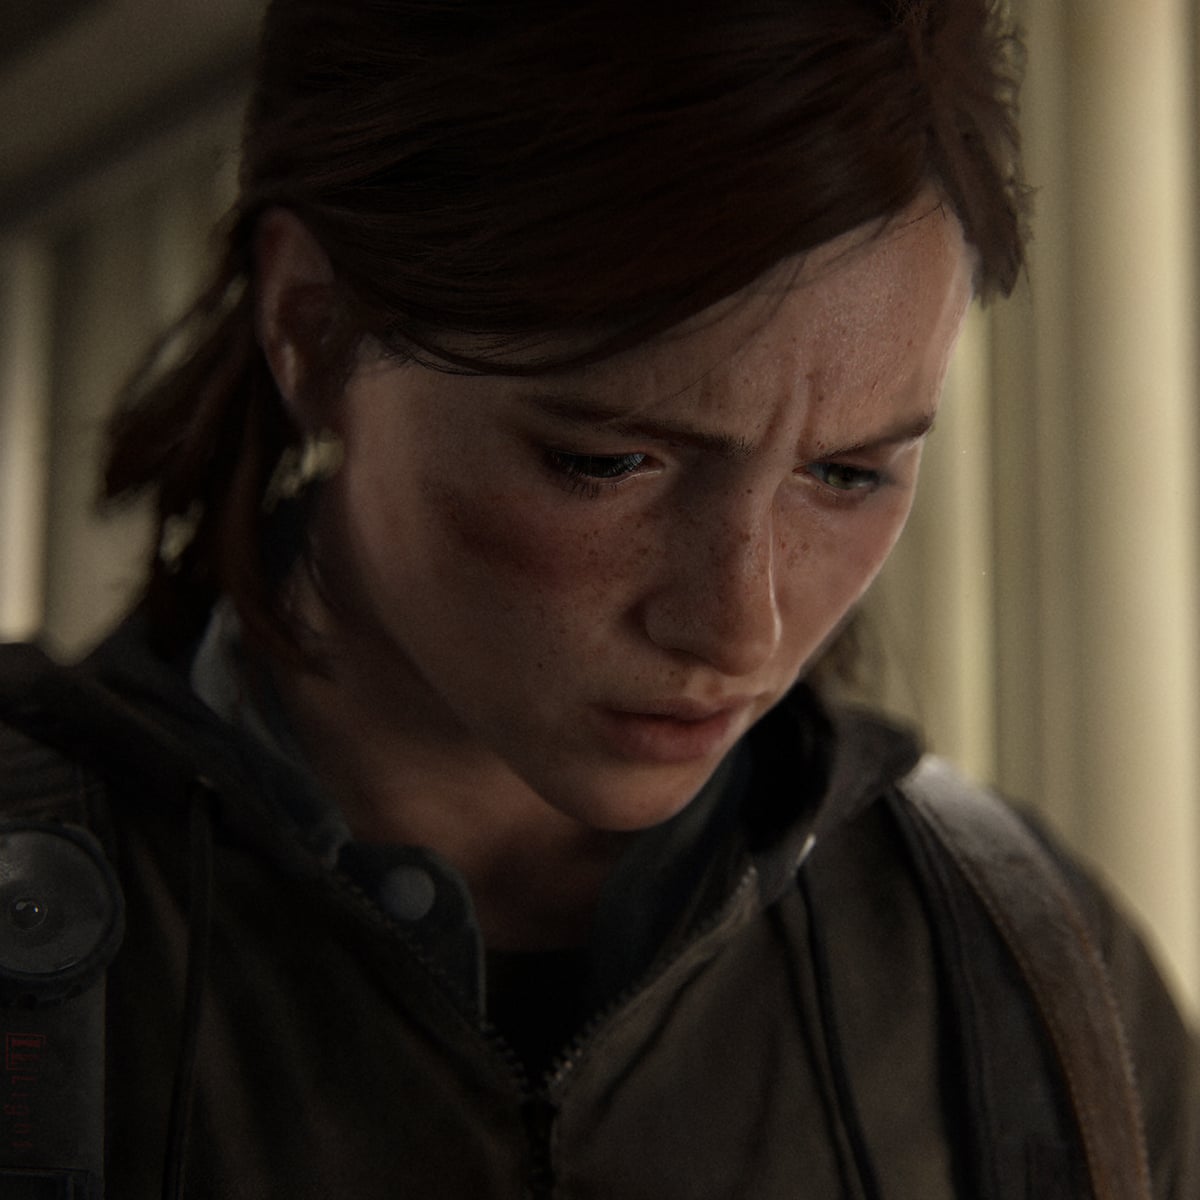 The Last of Us Part 2 review – post-apocalyptic game is